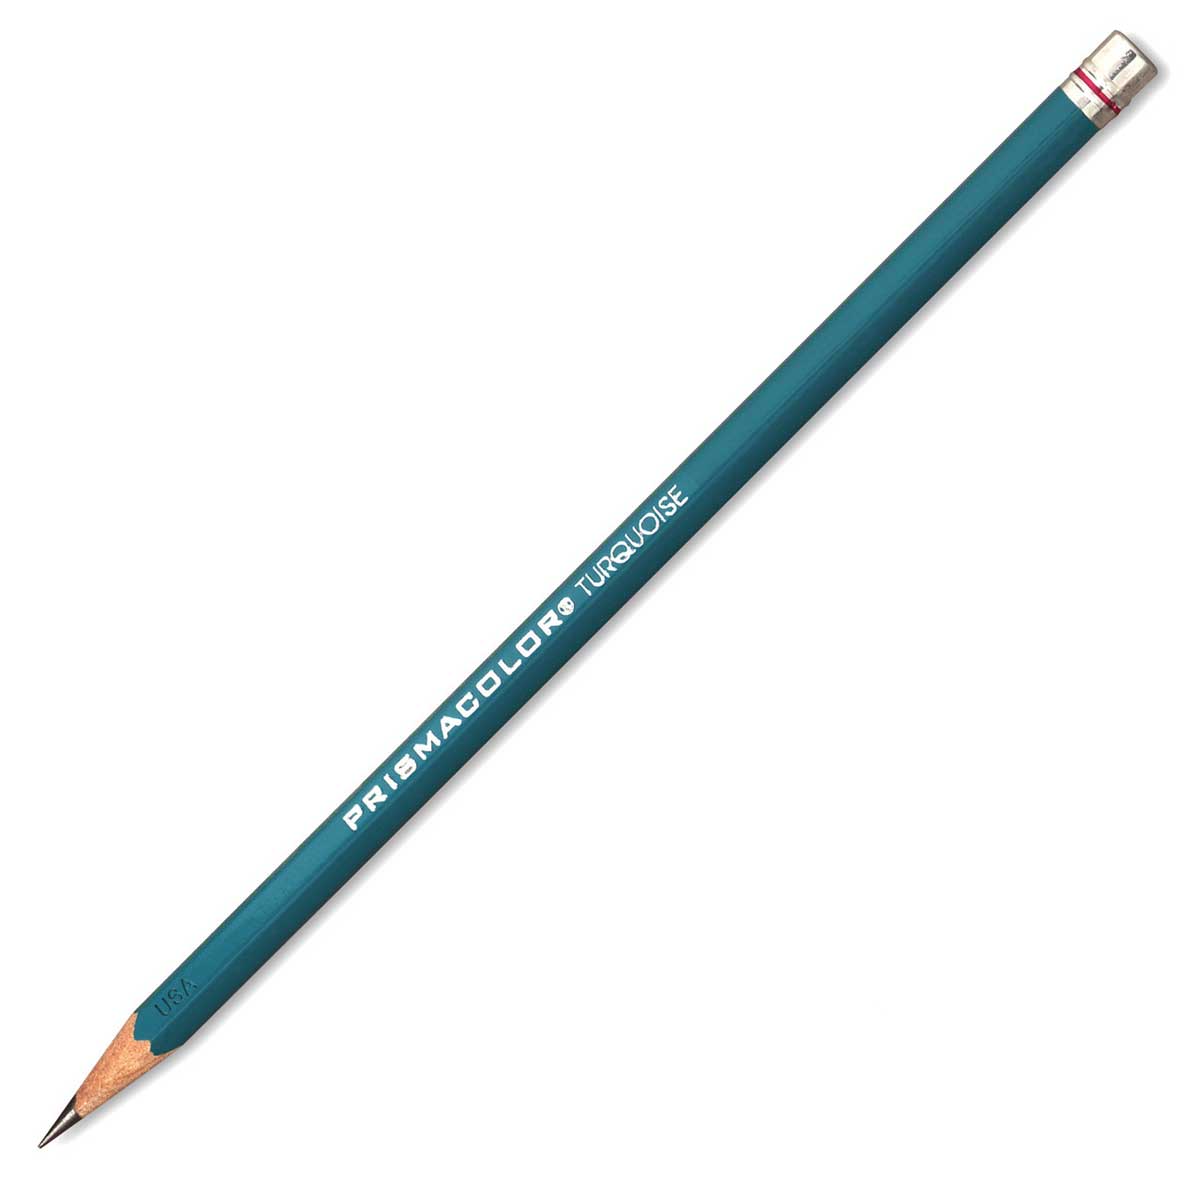 Prismacolor Turquoise Drawing Pencil - 7B